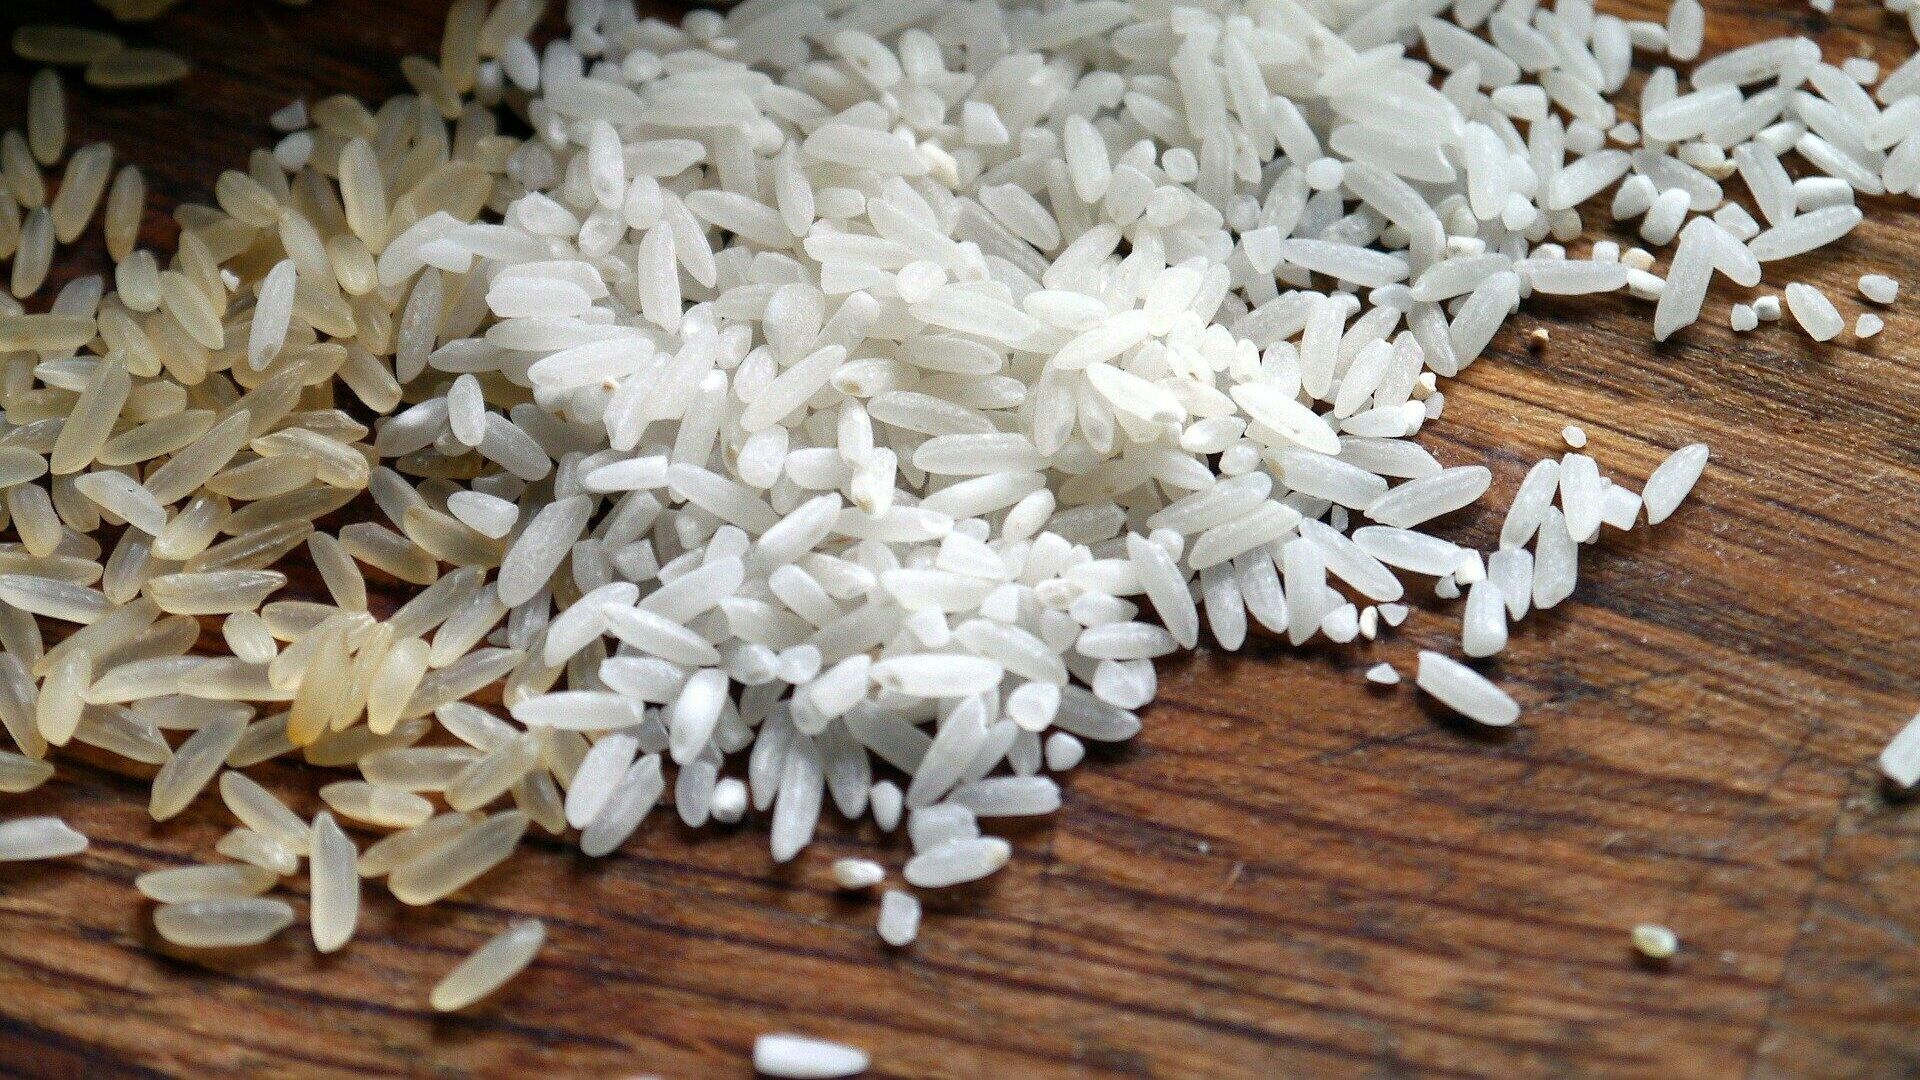 Rice prices in Asia rose to a two-year high due to the El Niño phenomenon